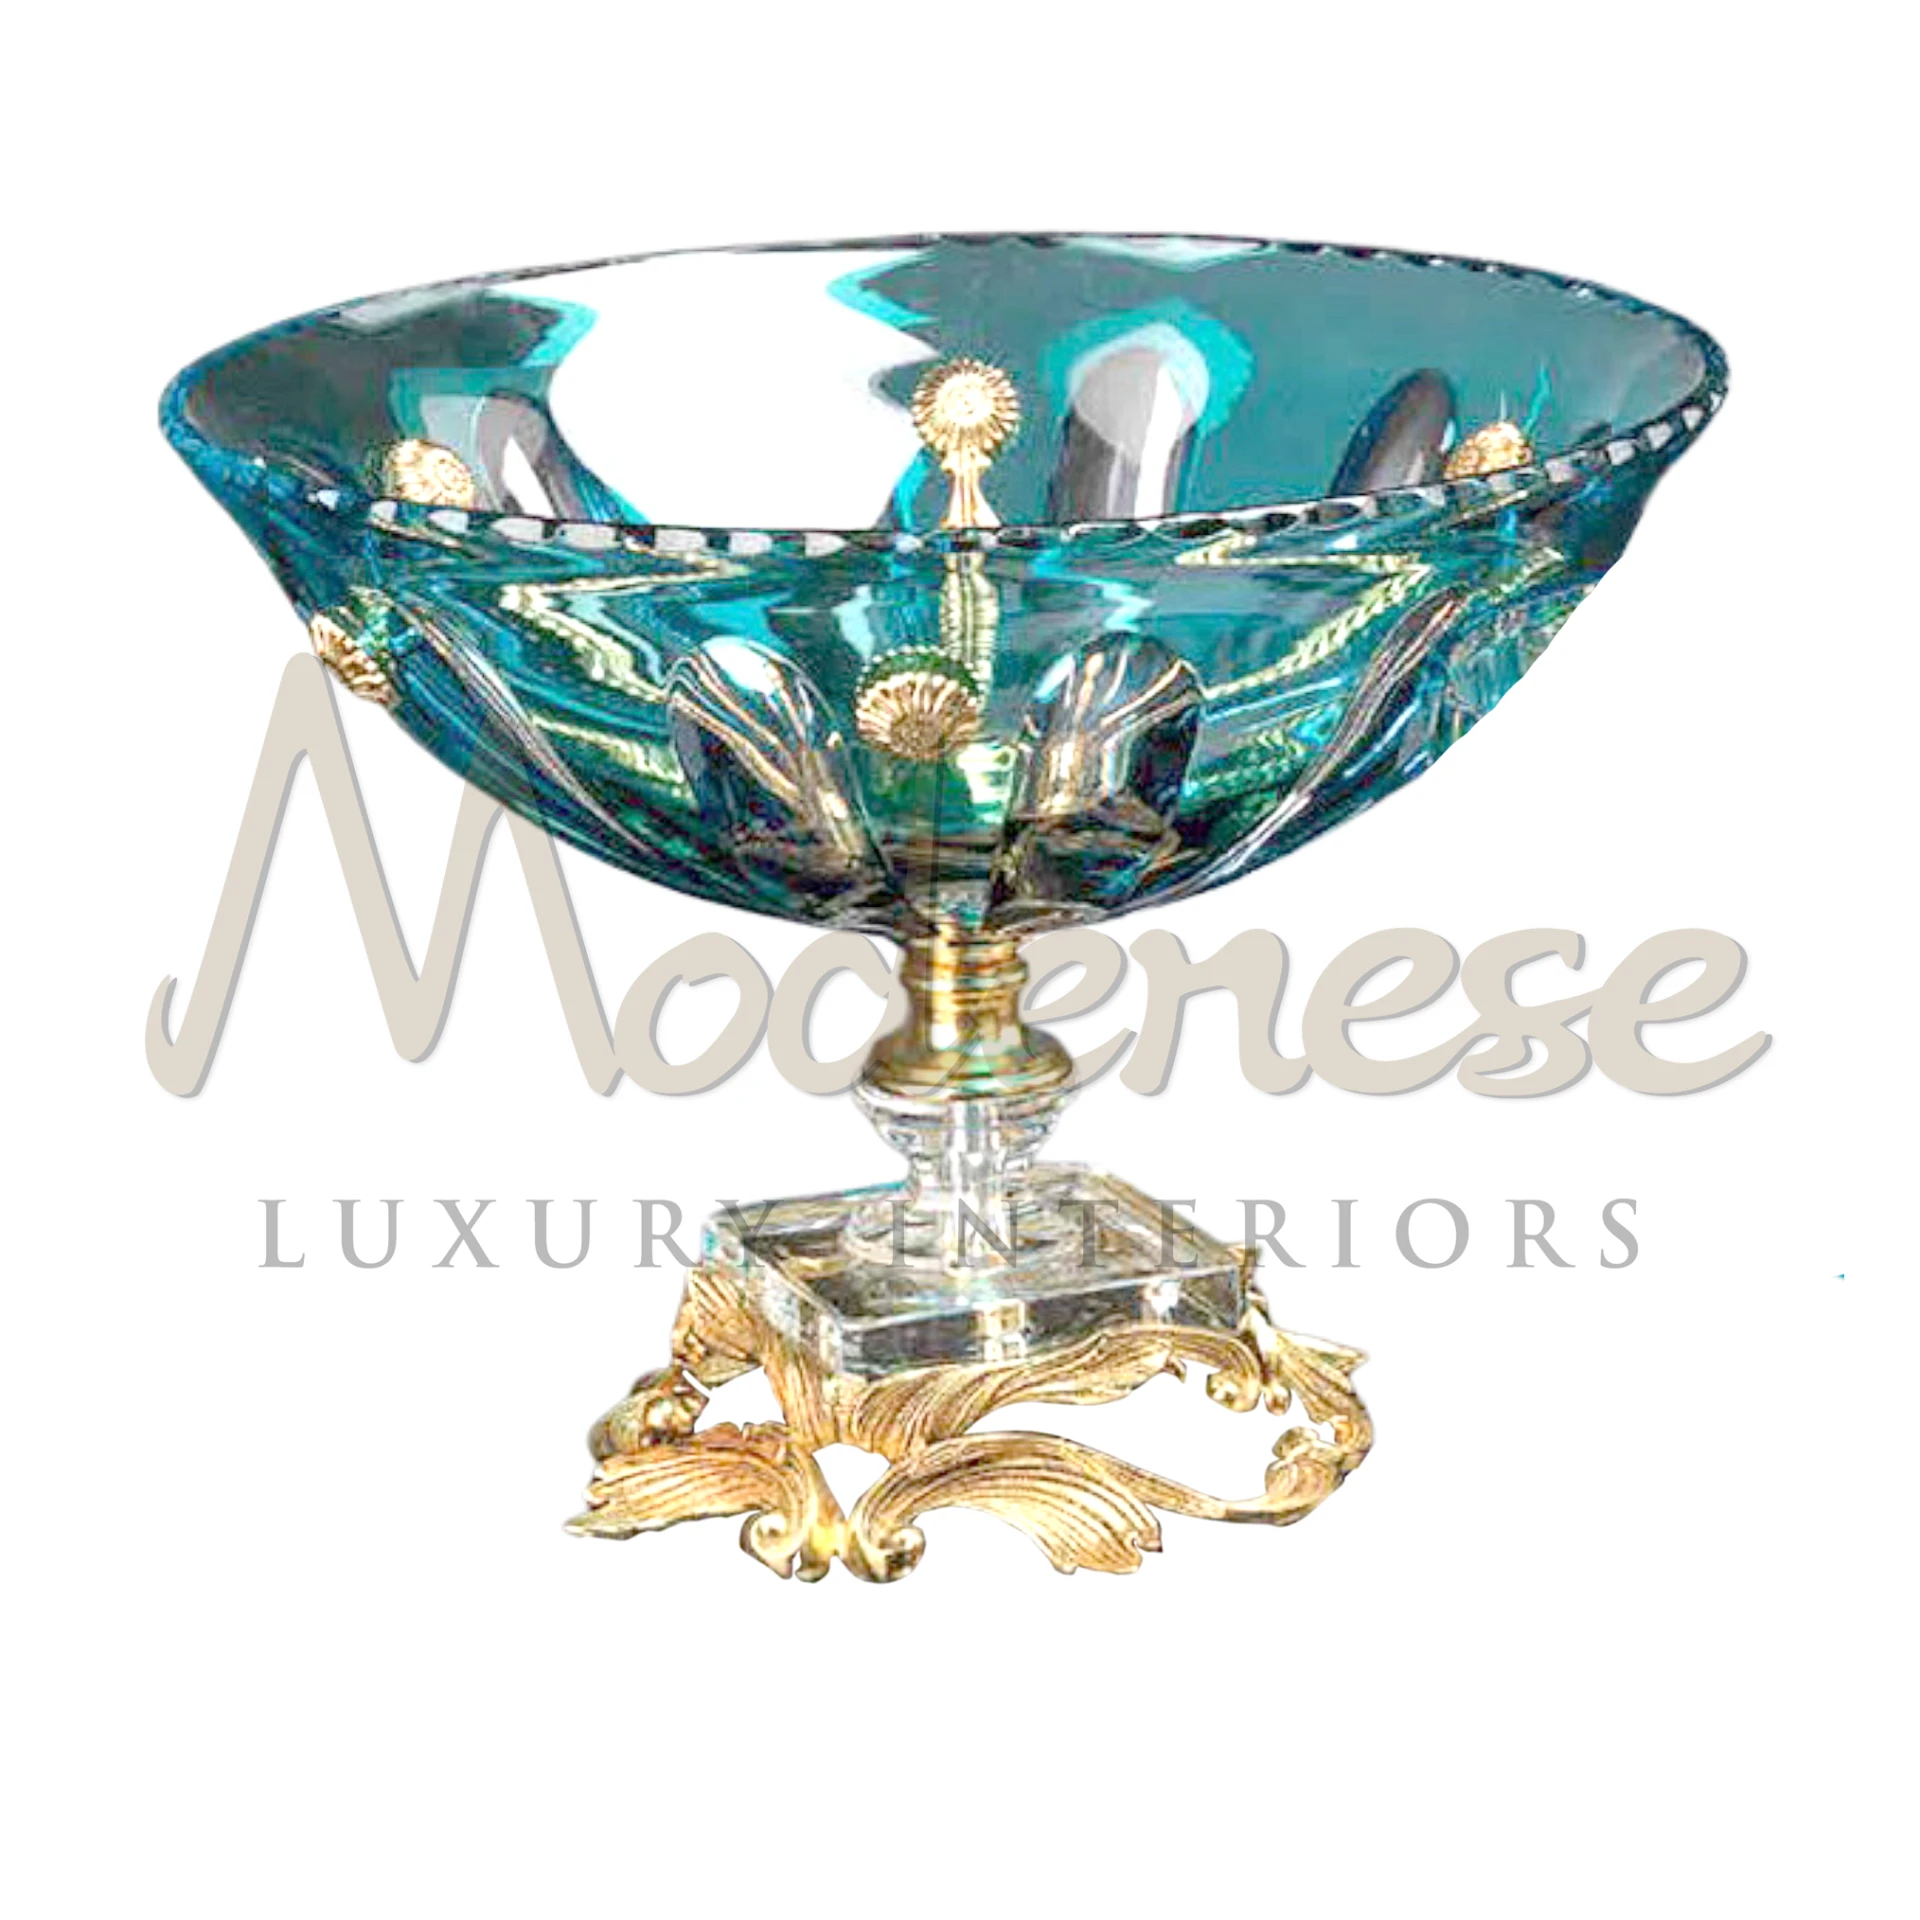 Turquoise Exquisite Bowl, crafted from luxurious materials with intricate designs, embodies skilled craftsmanship and rare beauty for elegant interiors.






